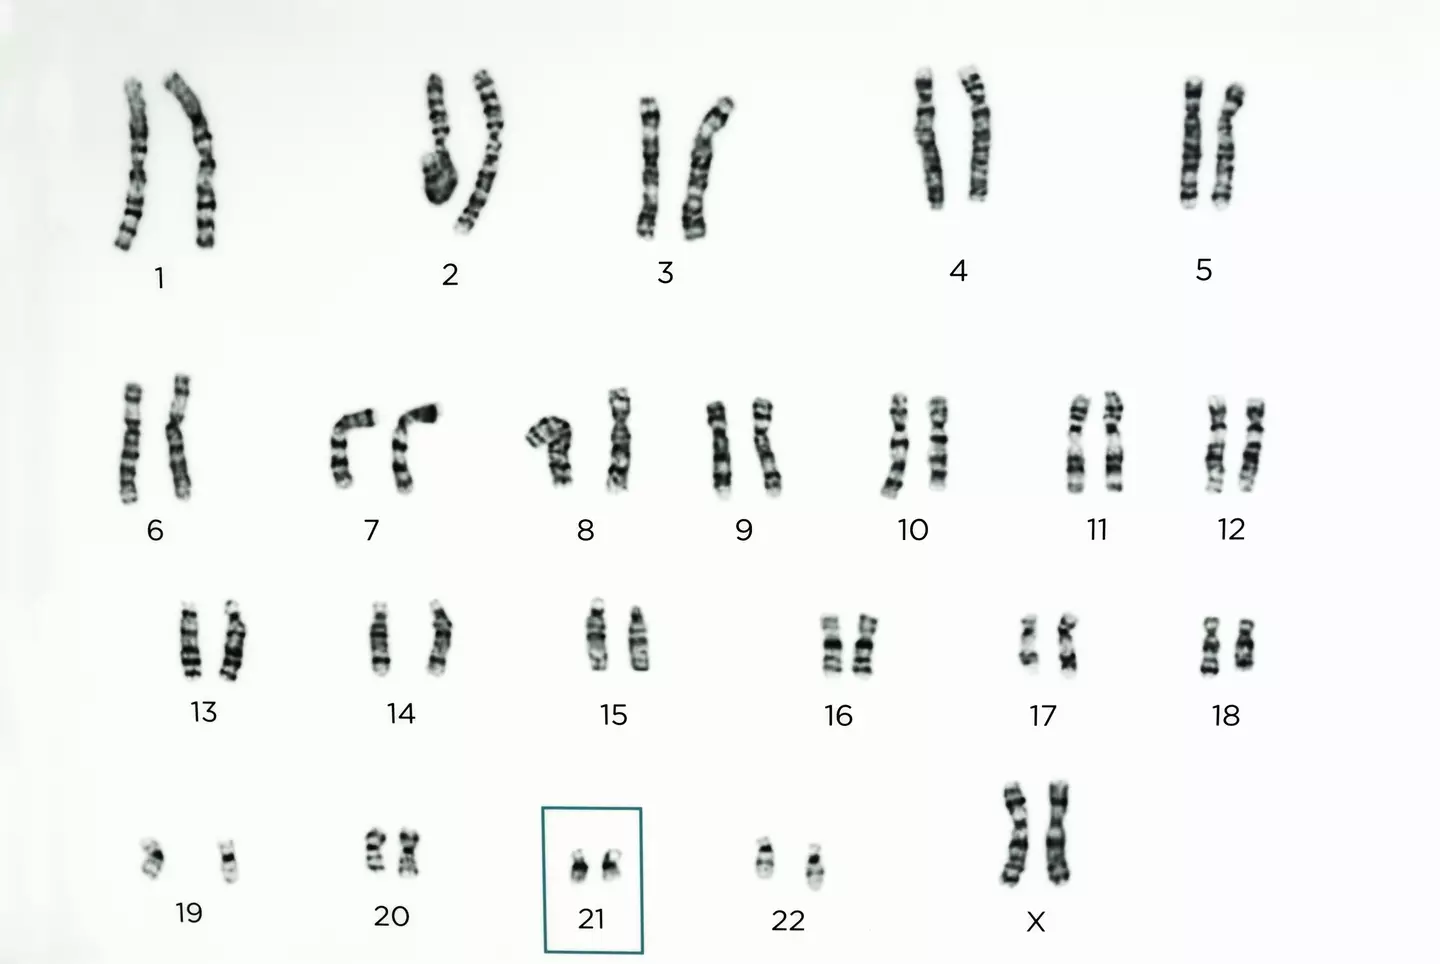 Scientists believe that the Y chromosome has degraded over time.